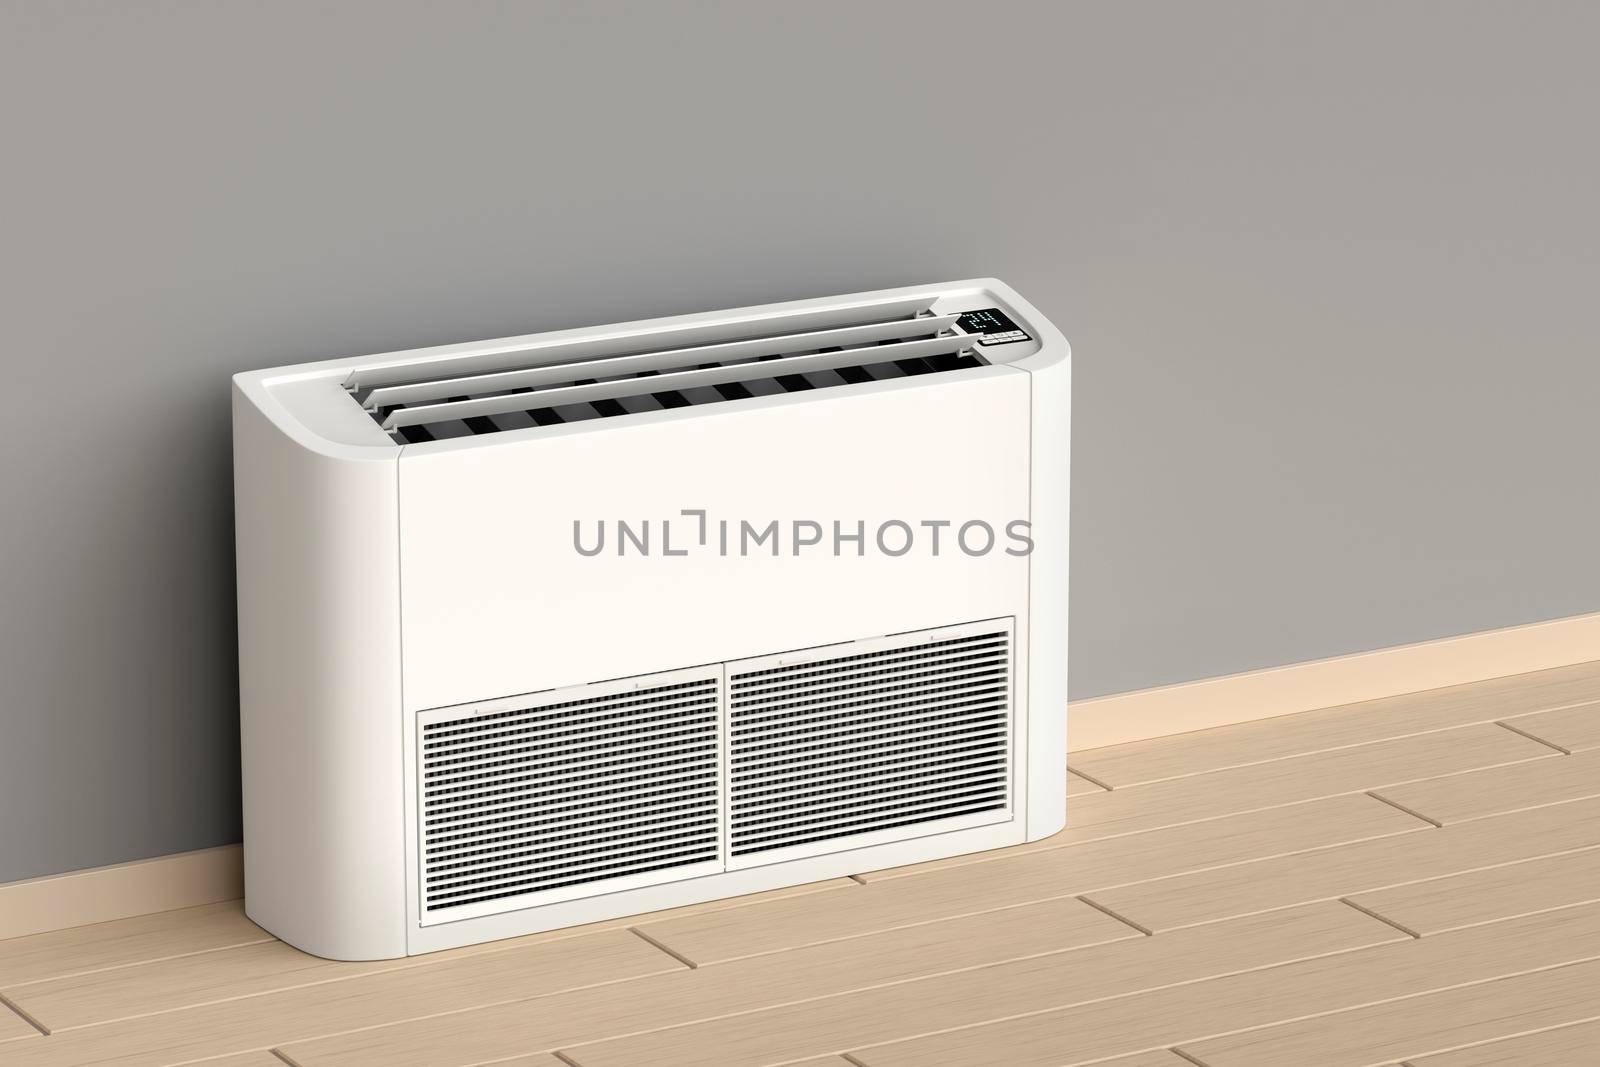 White floor mounted air conditioner in the room